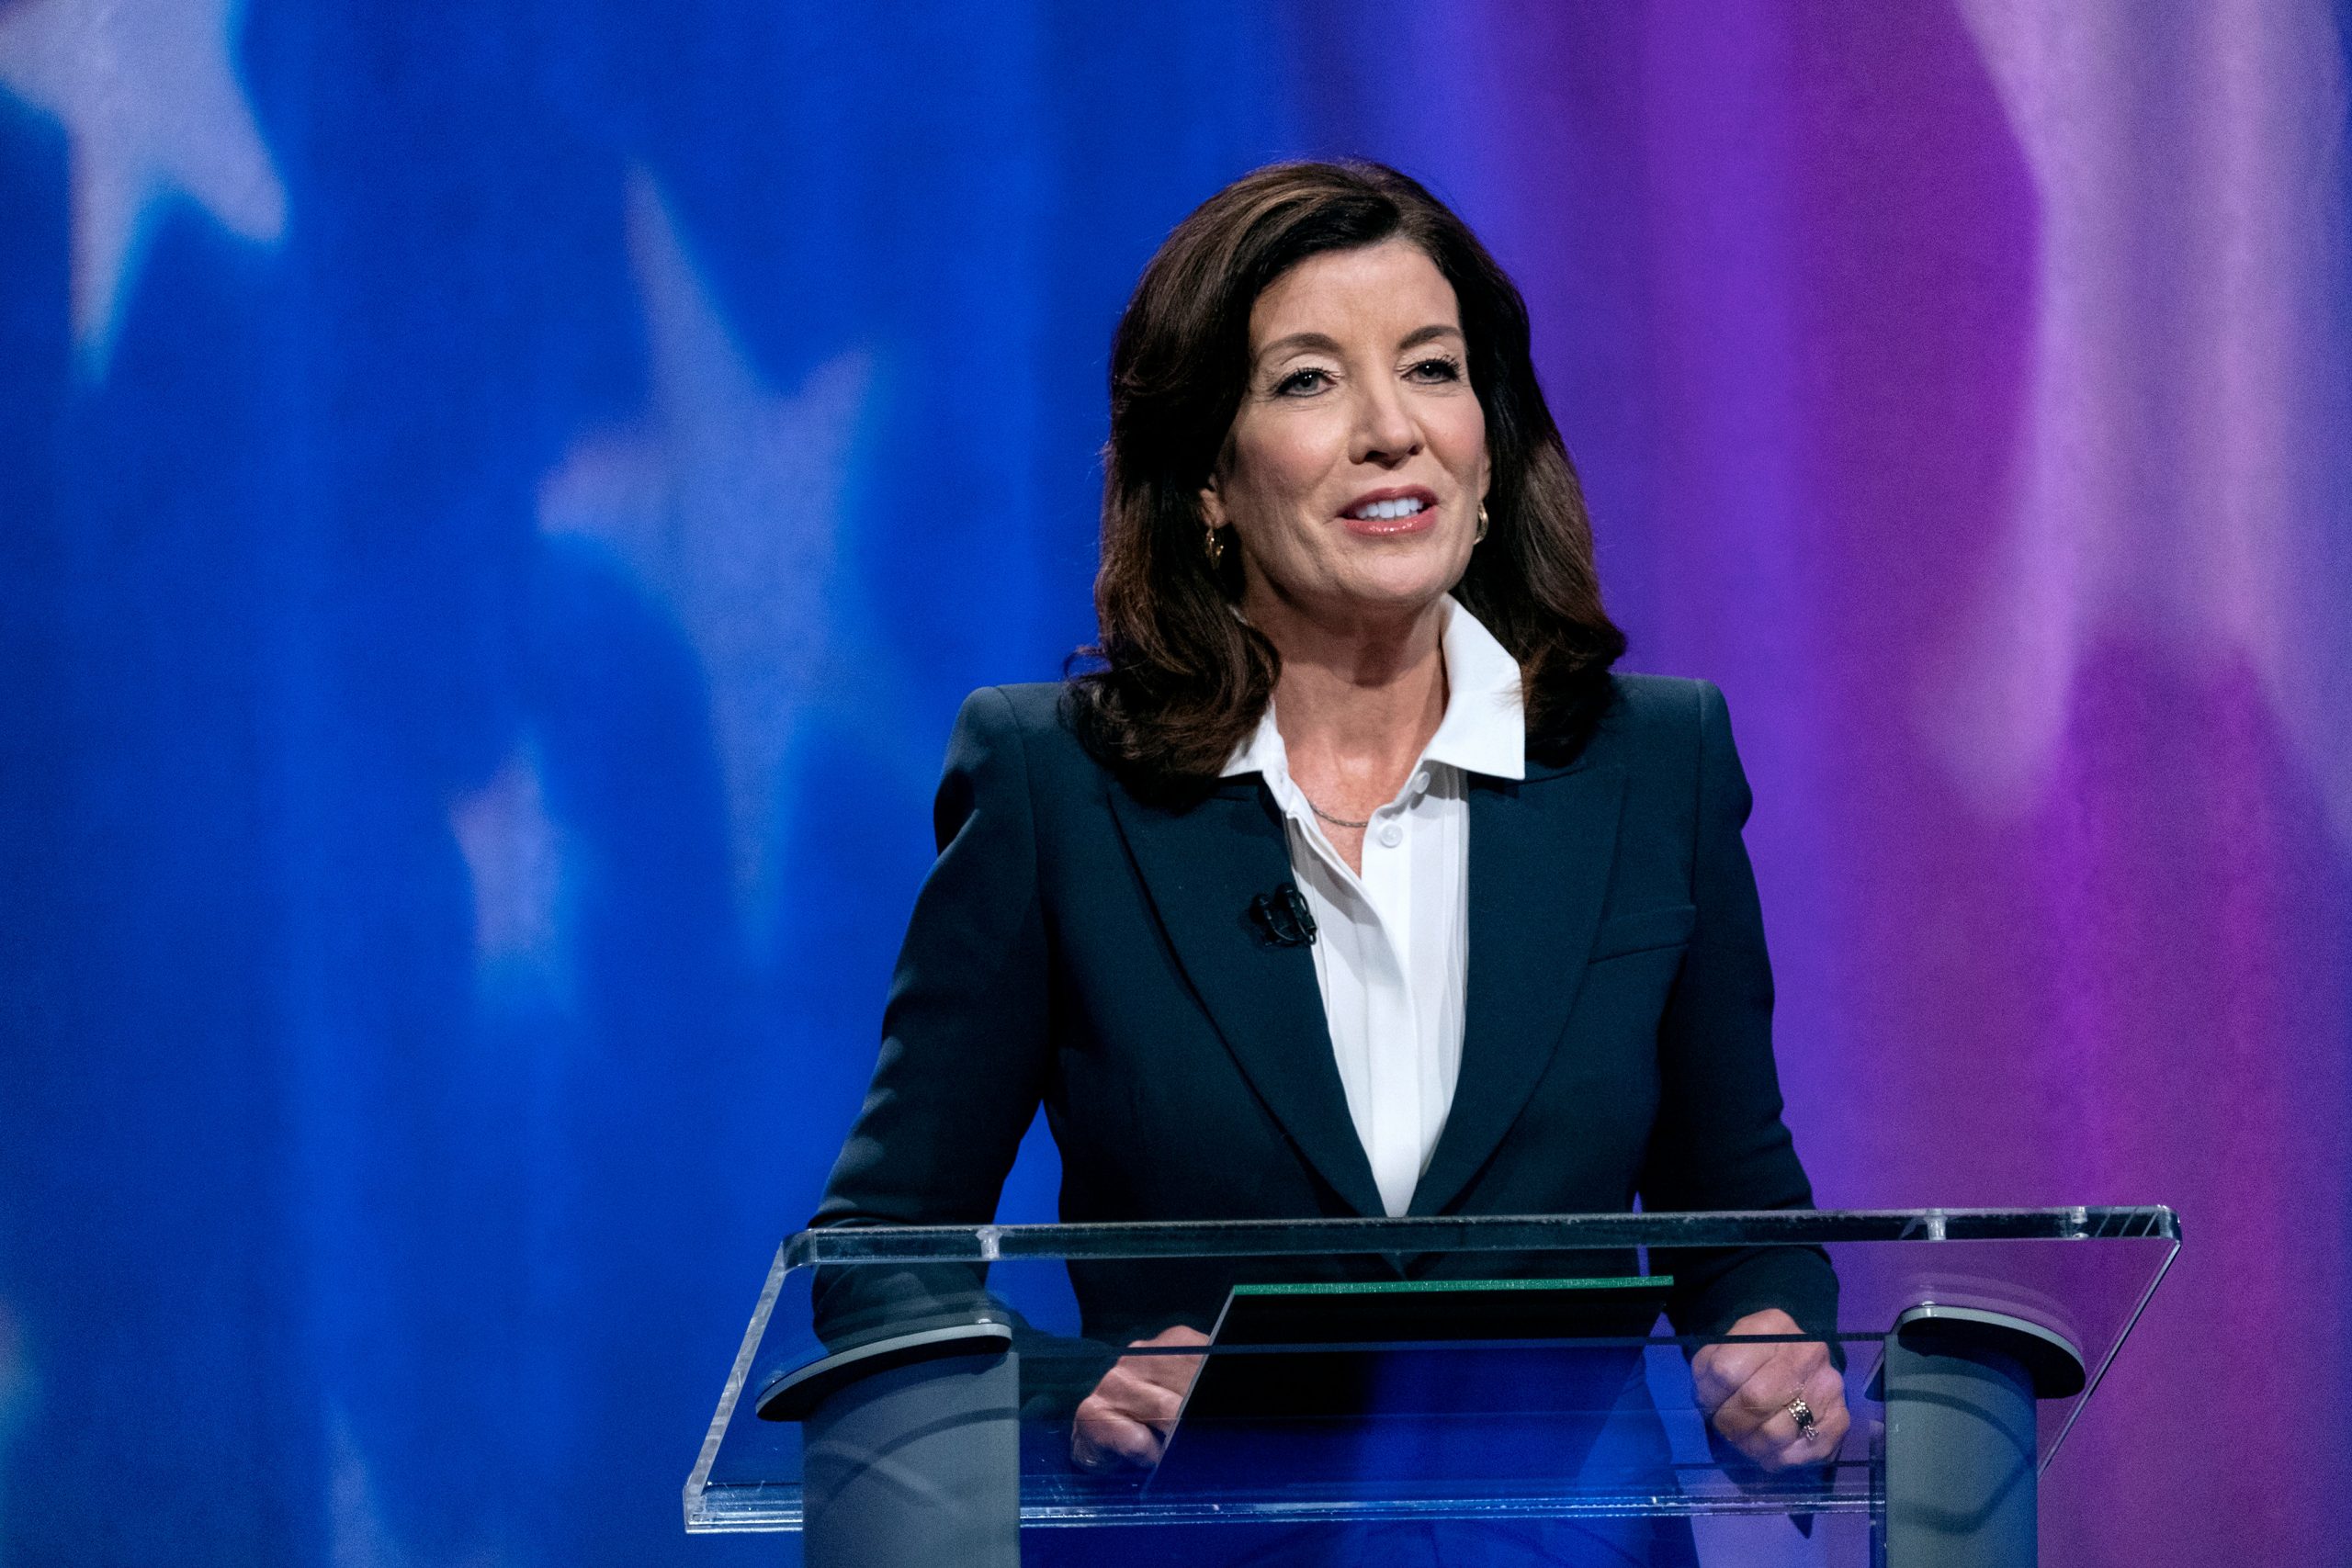 New York governor Kathy Hochul’s past controversies stain 2022 primary run